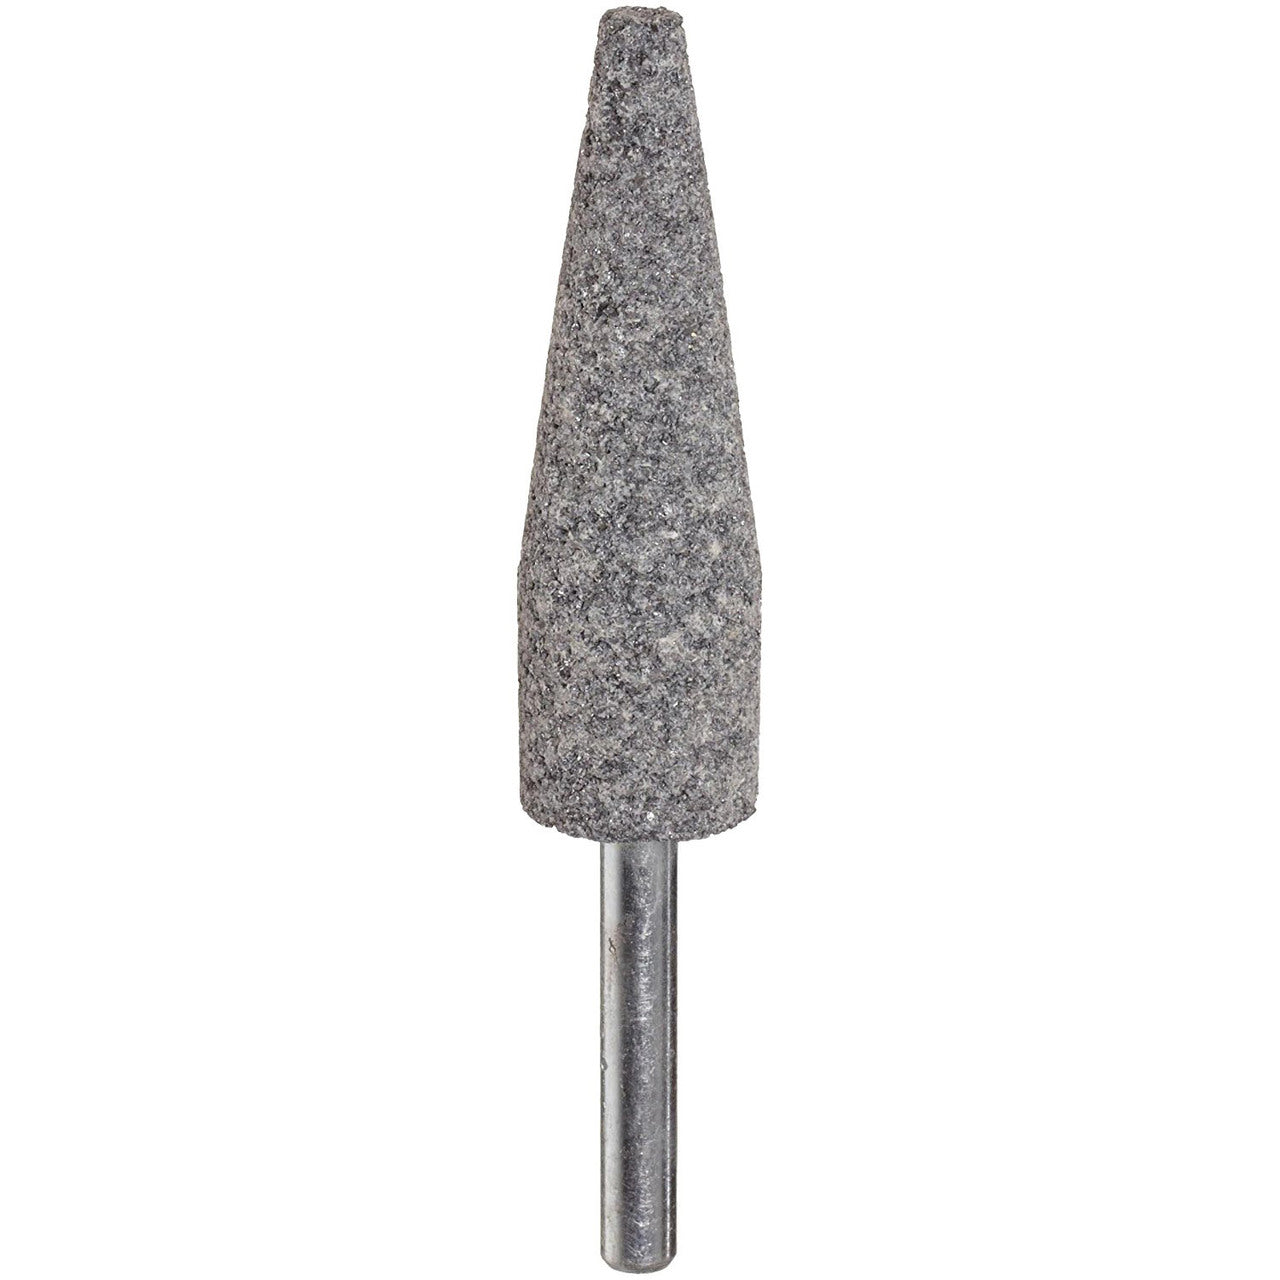 Pferd Grade R A1 Grit 30 - Silicon Carbide Mounted Point,  3/4" x 2.5", 31002